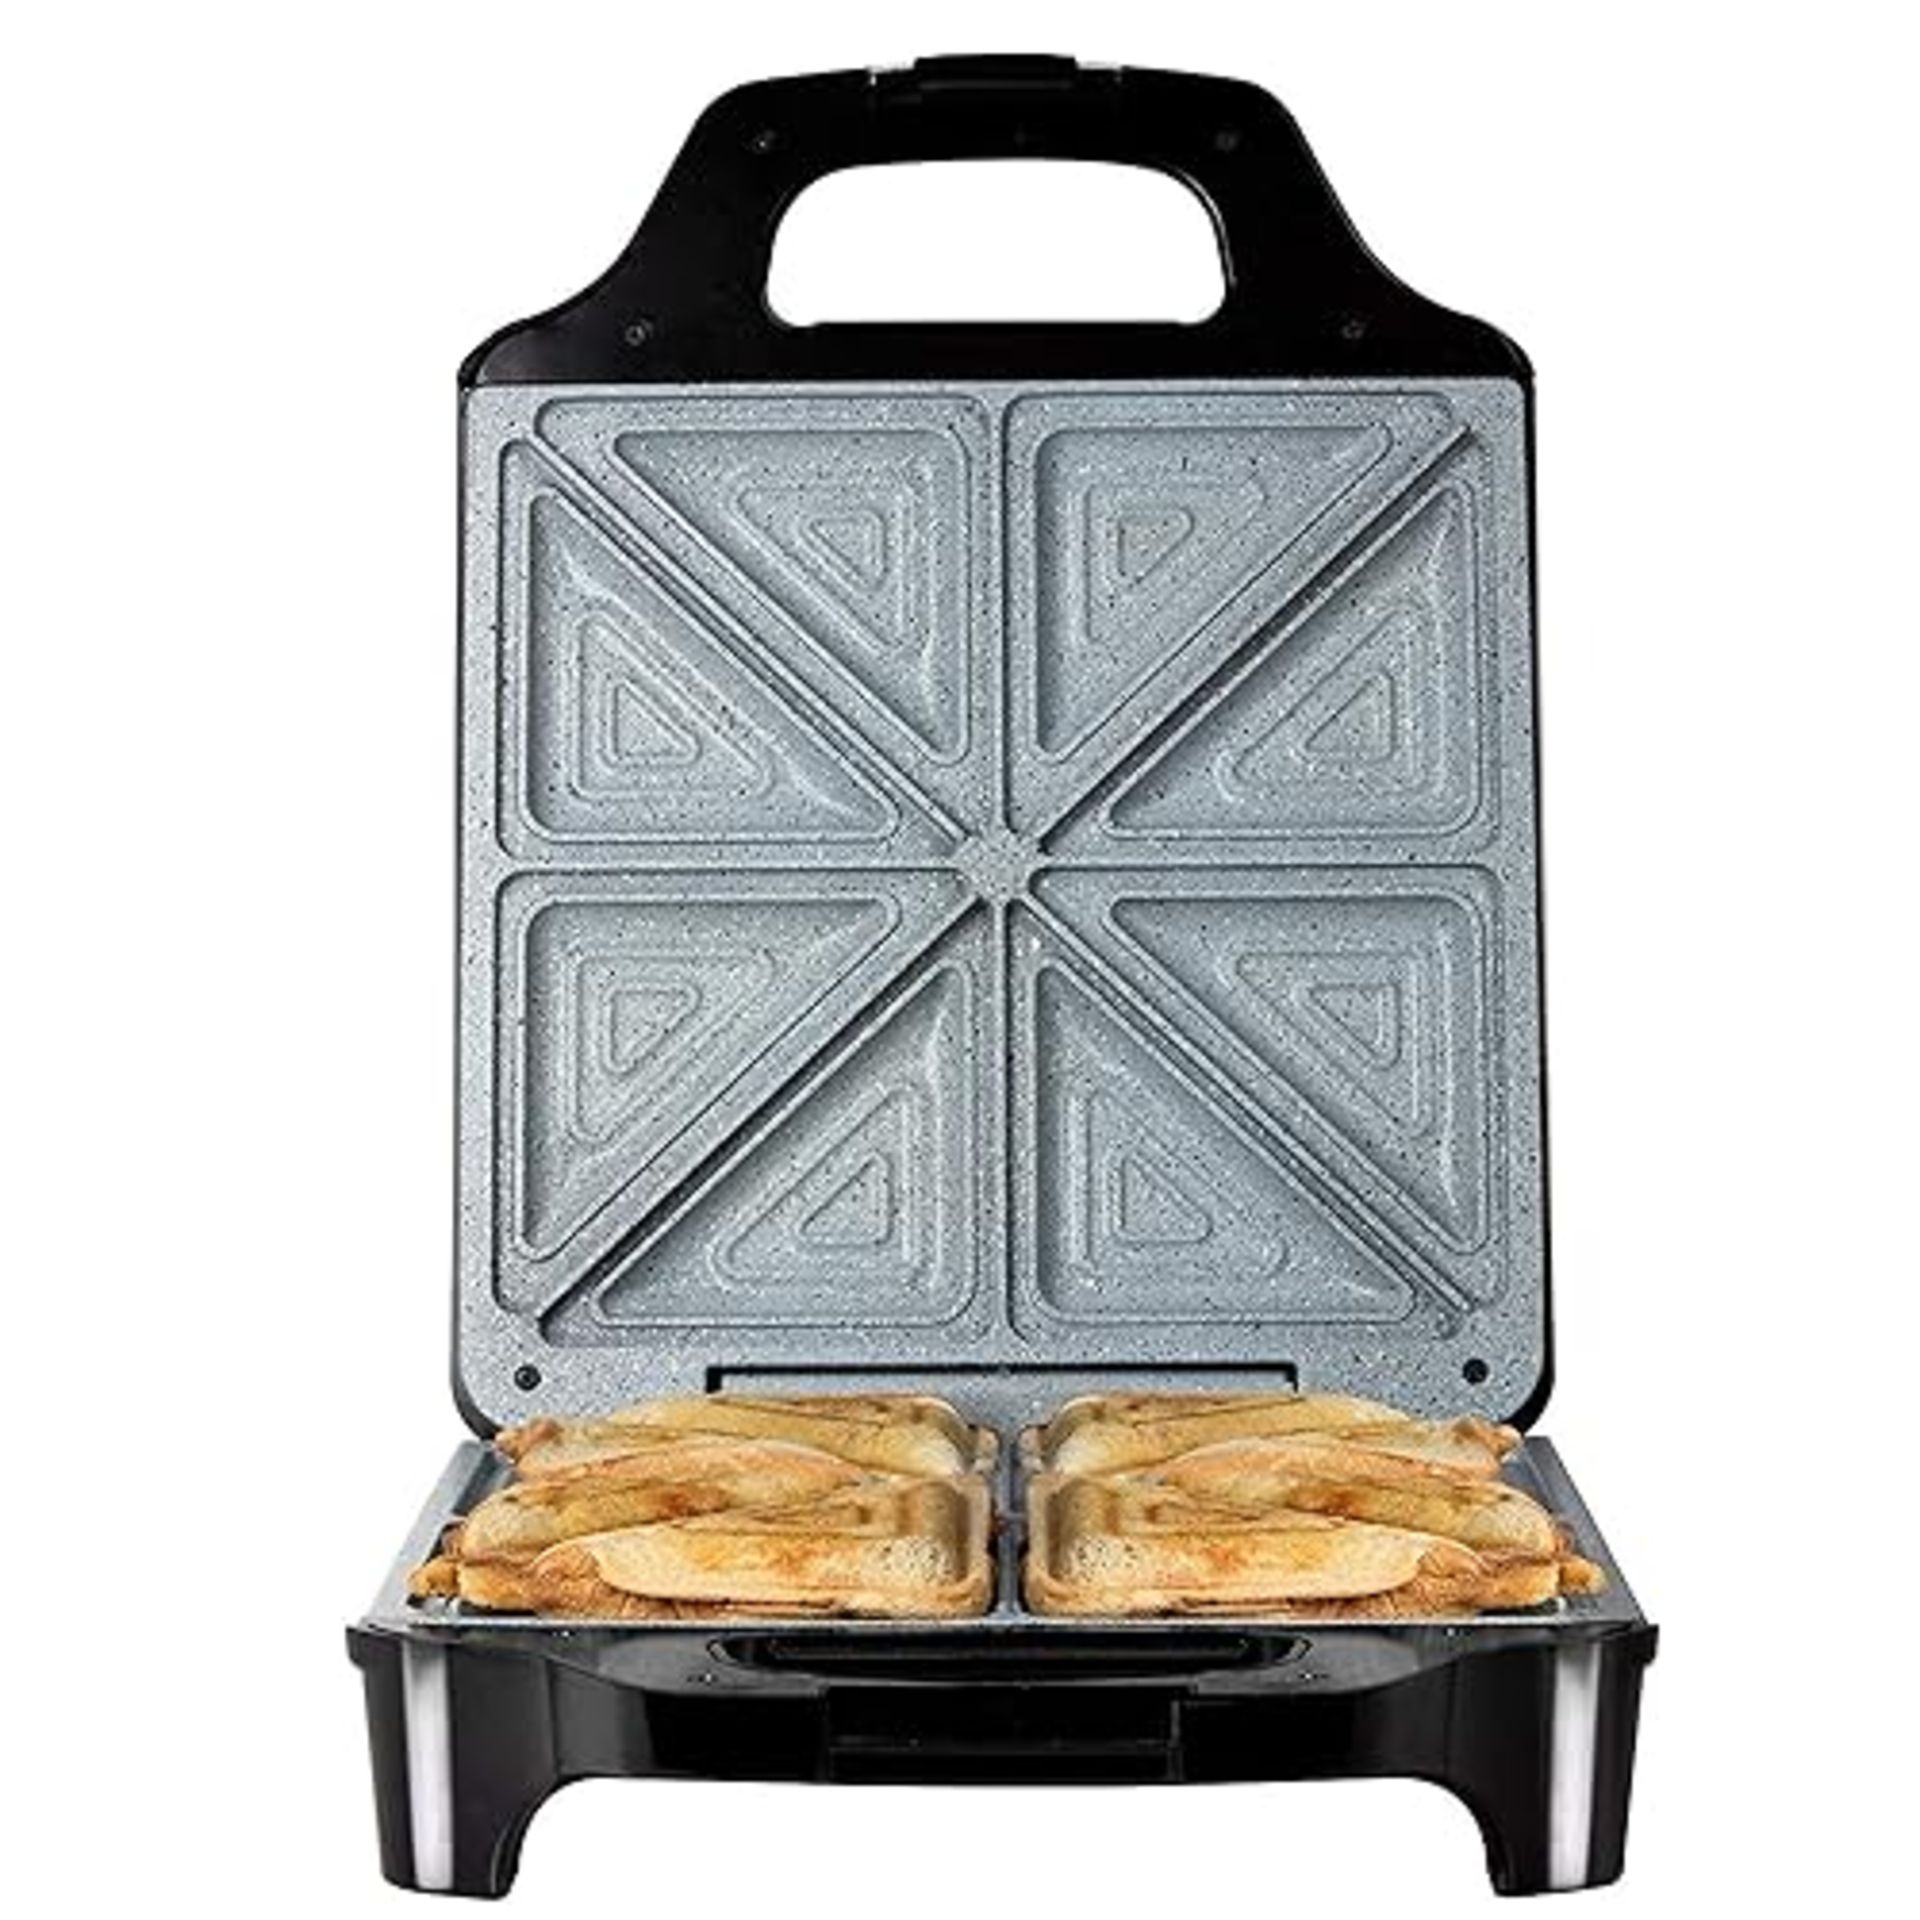 Tower T27021 4-Slice Deep Fill Sandwich Maker with Easy Clean, Non-Stick Plates, Automatic Temperat